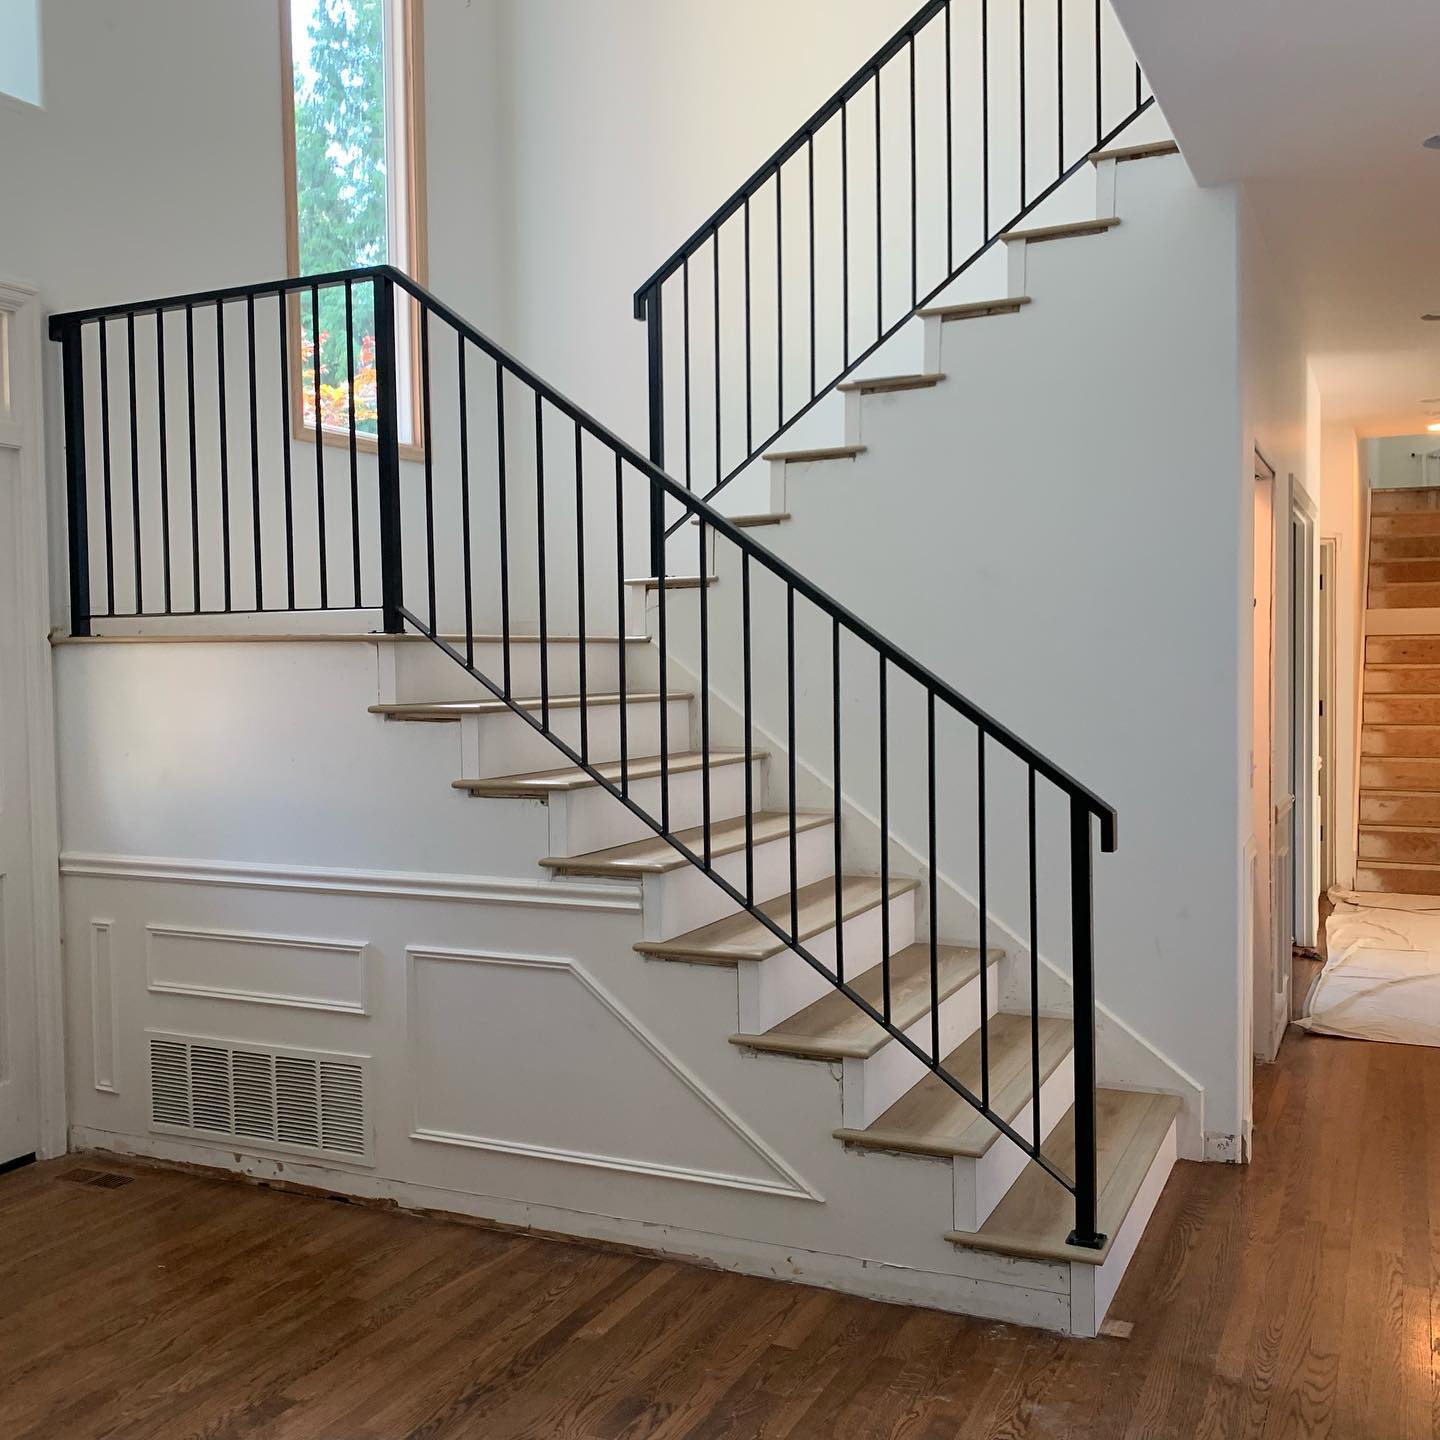 How Custom Metal Railings Add Value to Your Home